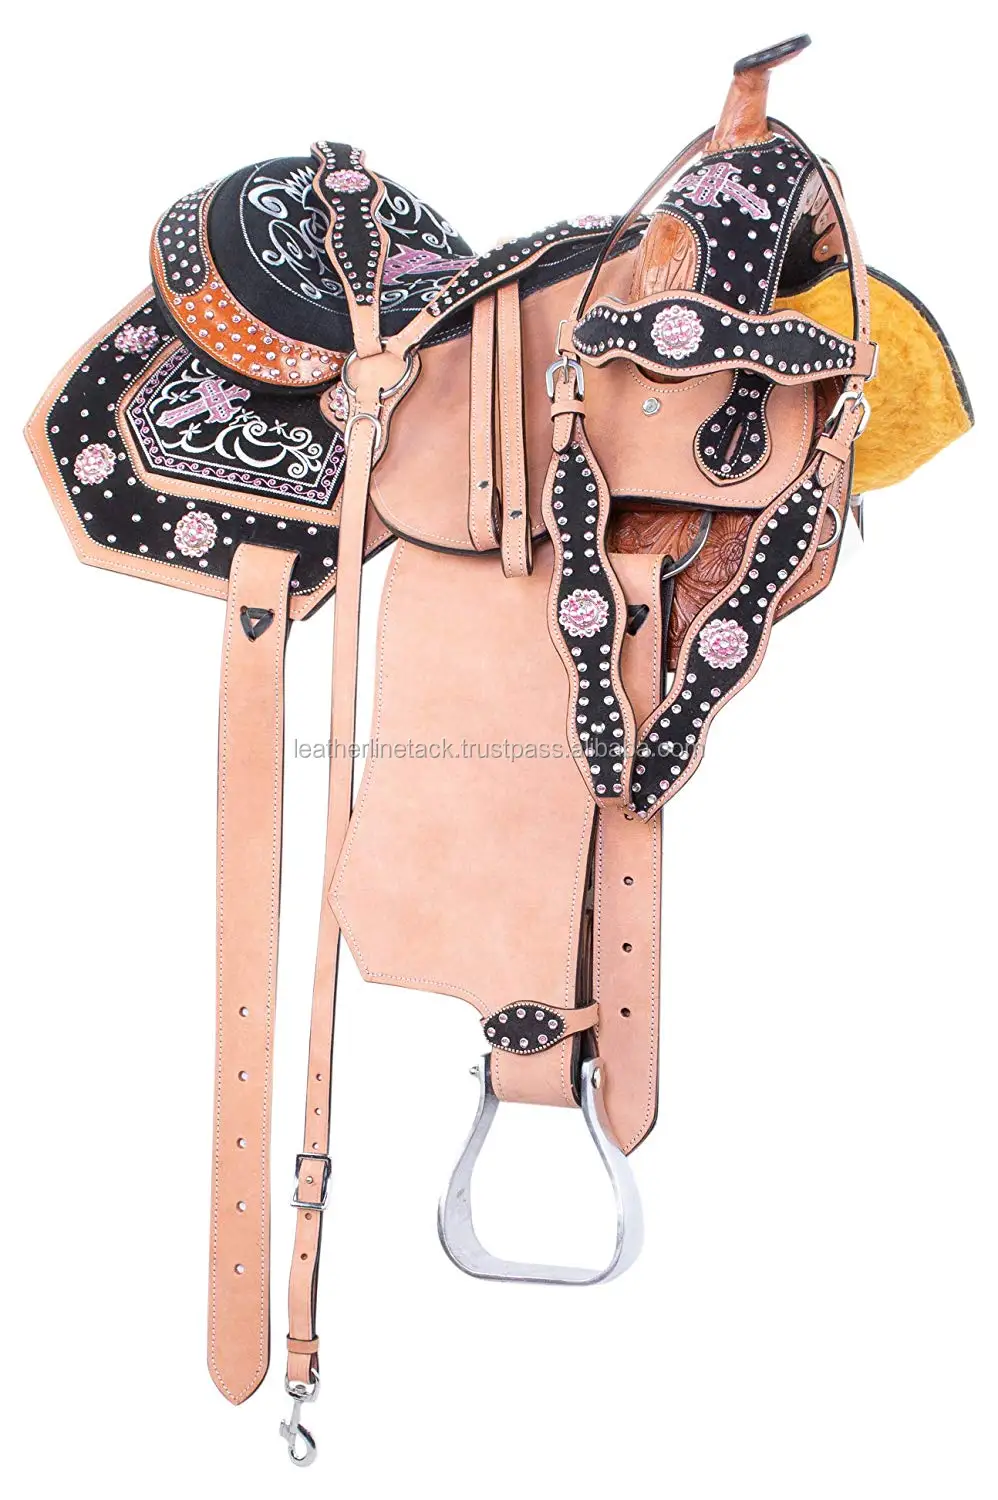 Details about   Synthetic Western Adult Barrel Racing Horse Saddle Tack Set Size 12 to 18 Seat 